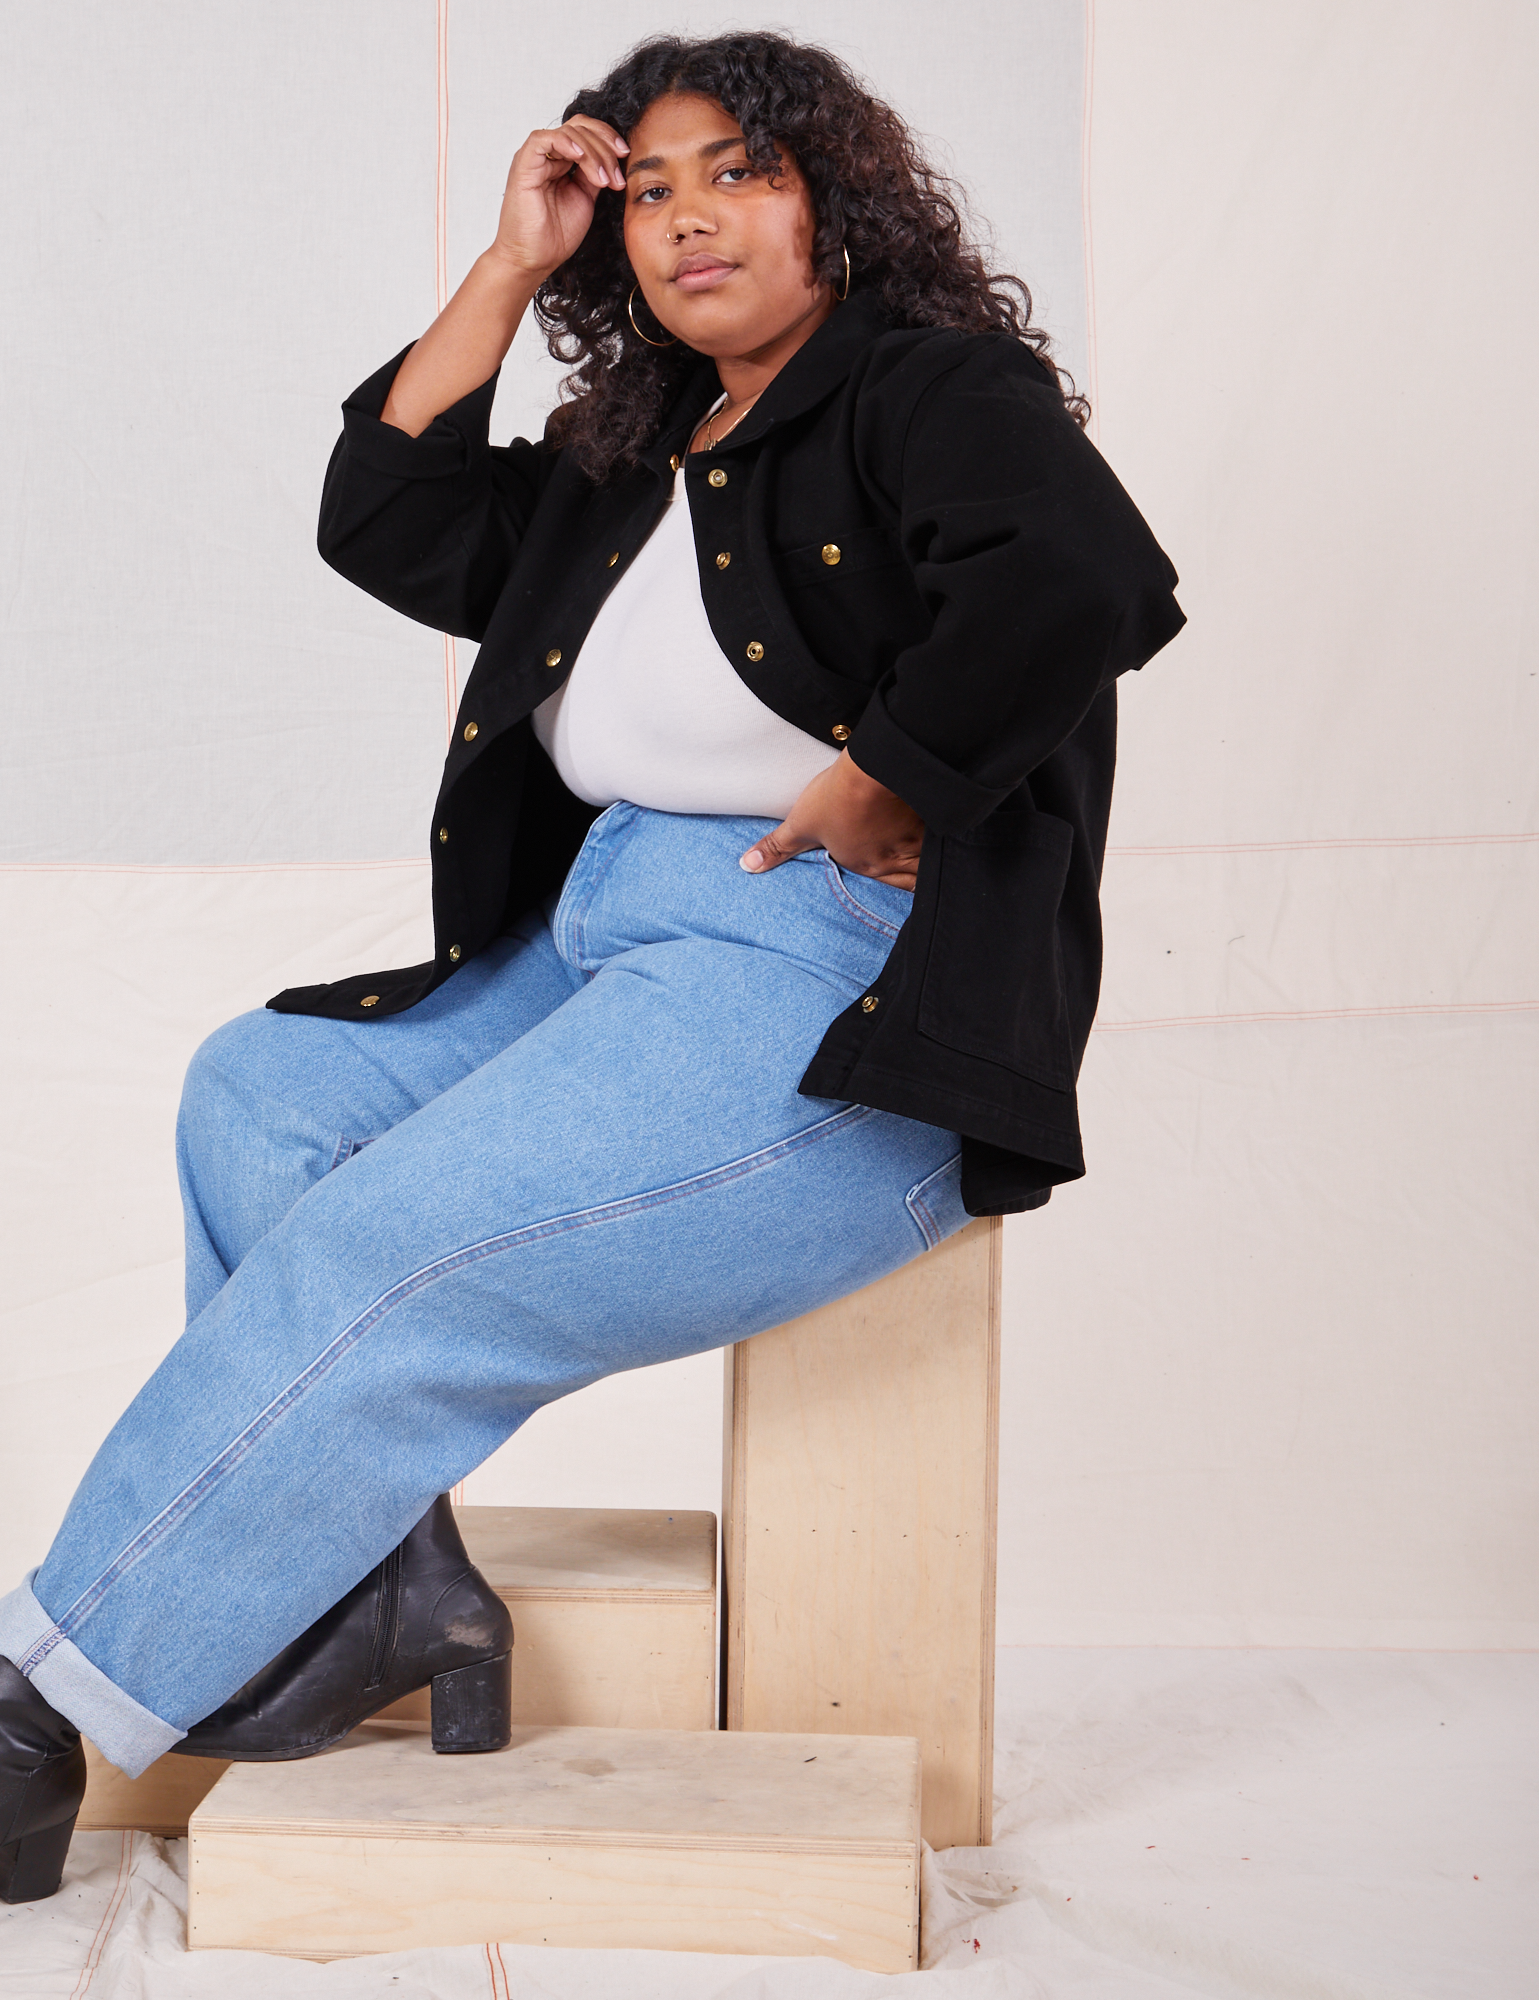 Morgan is sitting sideways on a wooden crate. She is wearing Denim Work Jacket in Basic Black, vintage off-white Baby Tee and light wash Frontier Jeans